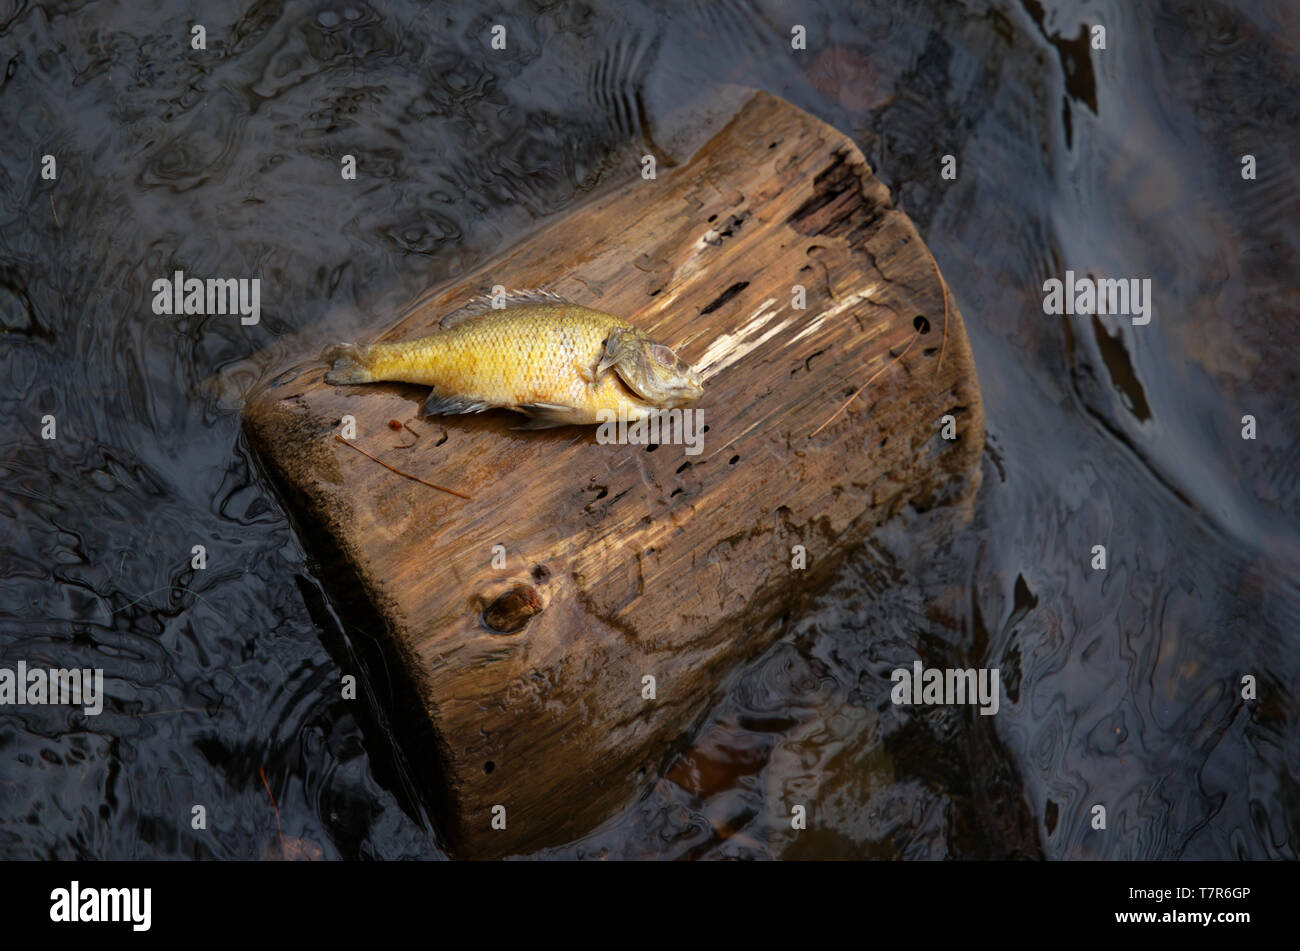 An unusual event of a dead fish on a floating log in the middle of the water. Stock Photo